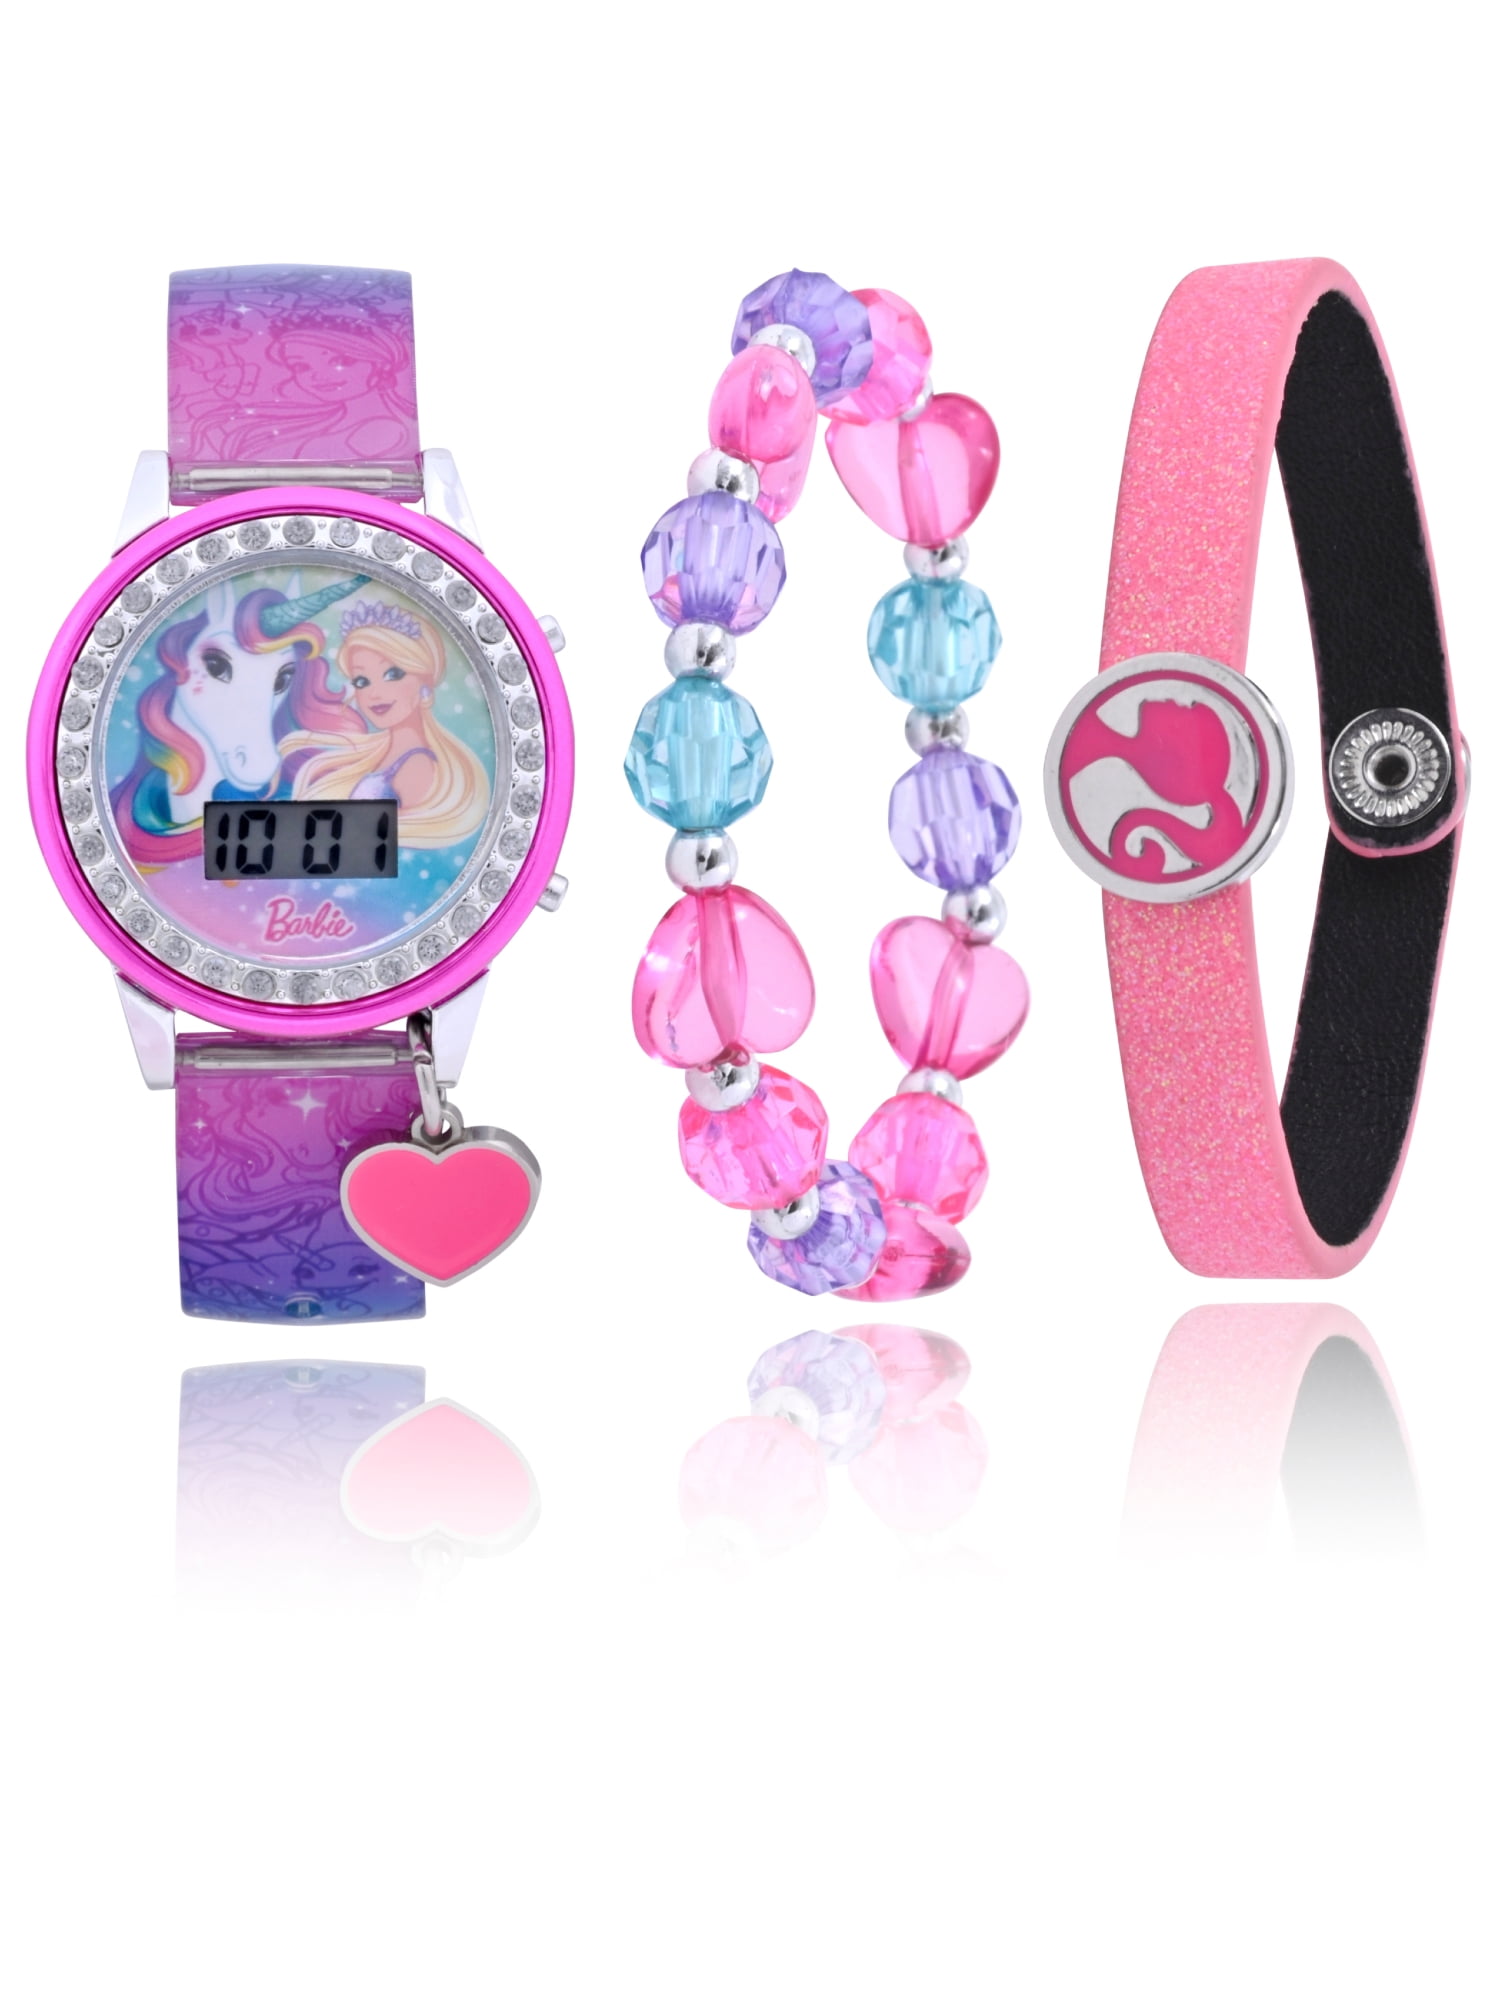 Fashionable LED Digital Projector Watch For Kids With 24 Images